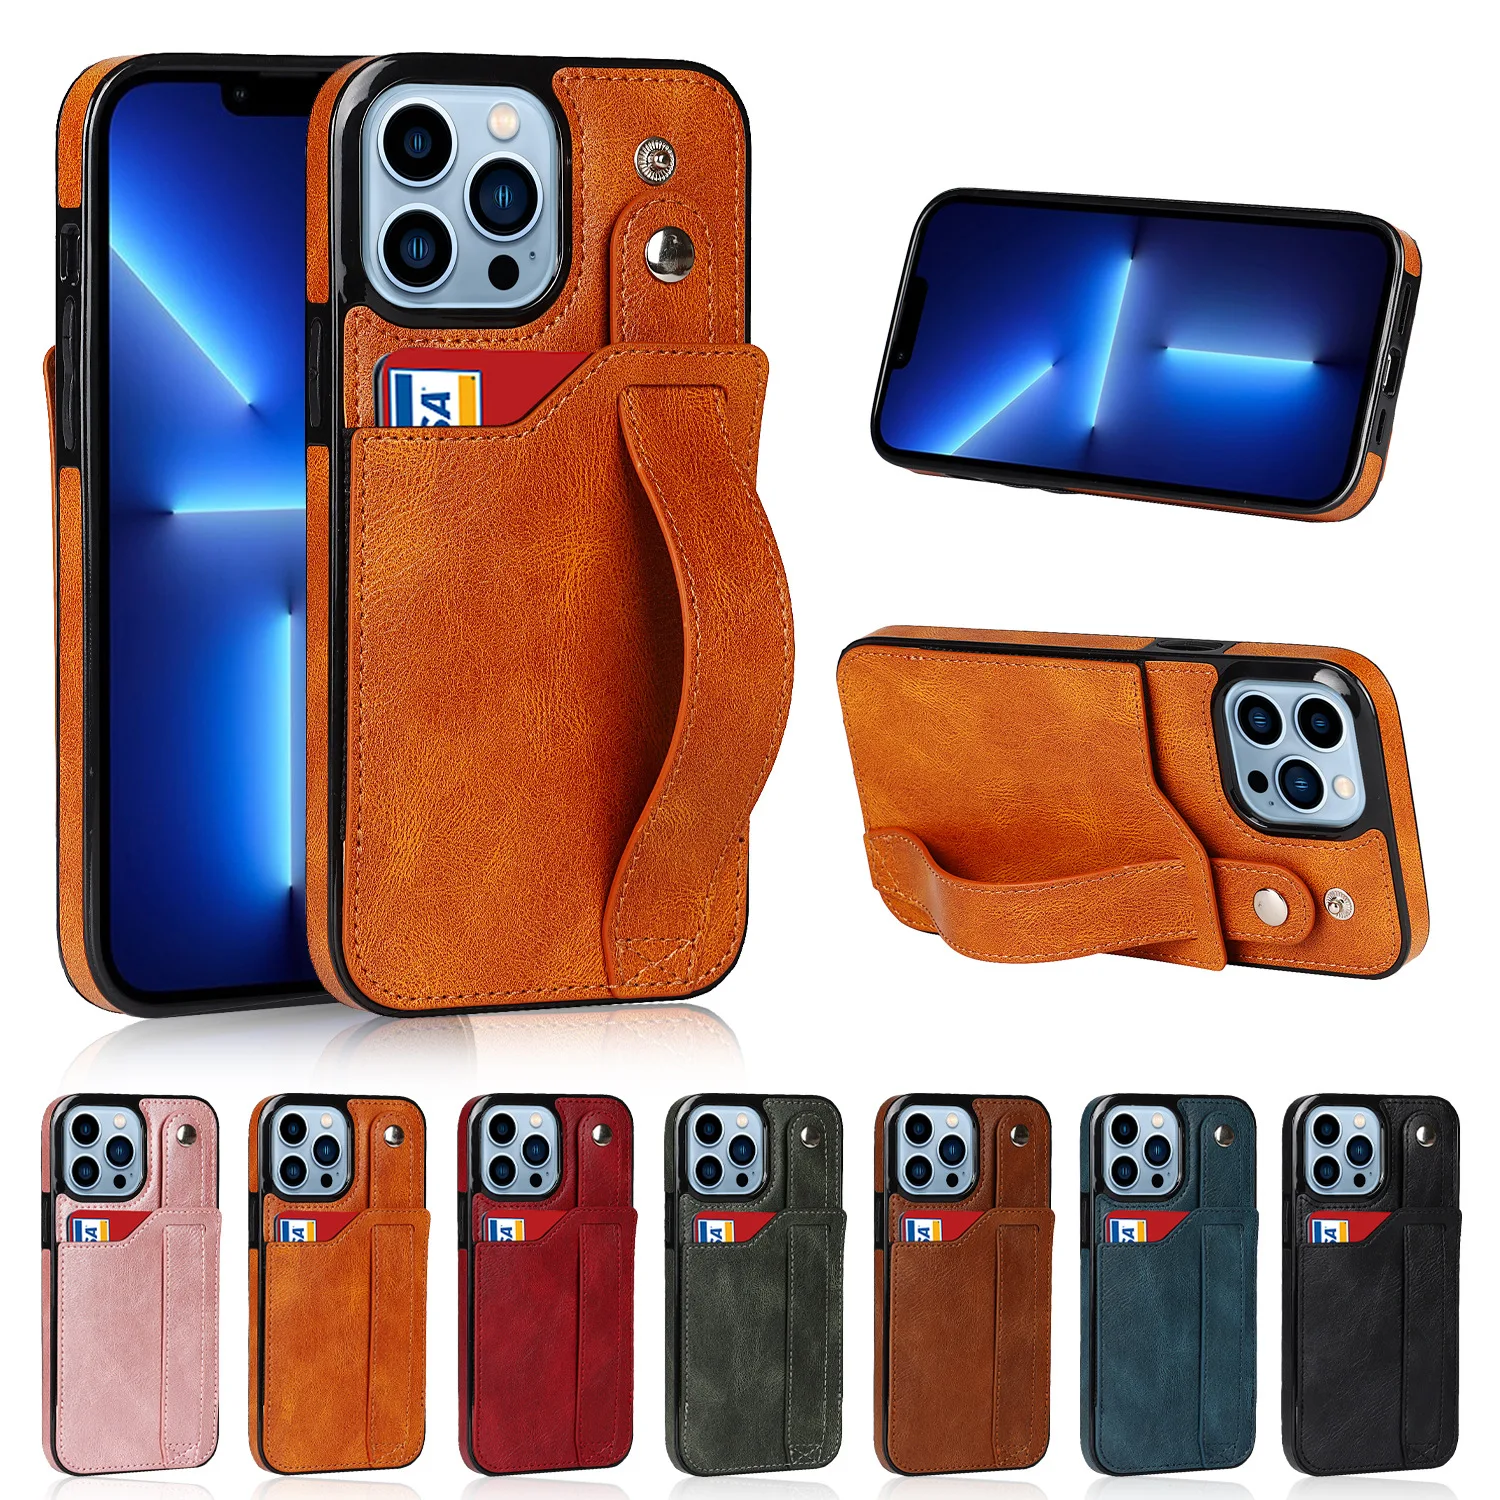 Leather Phone Case For Samsung Samsung A71 A51 A73 A53 A33 A85 A22 A32 A42 A12 M10 A72 A52 A10  Card Wallet Wristband Bag Cover